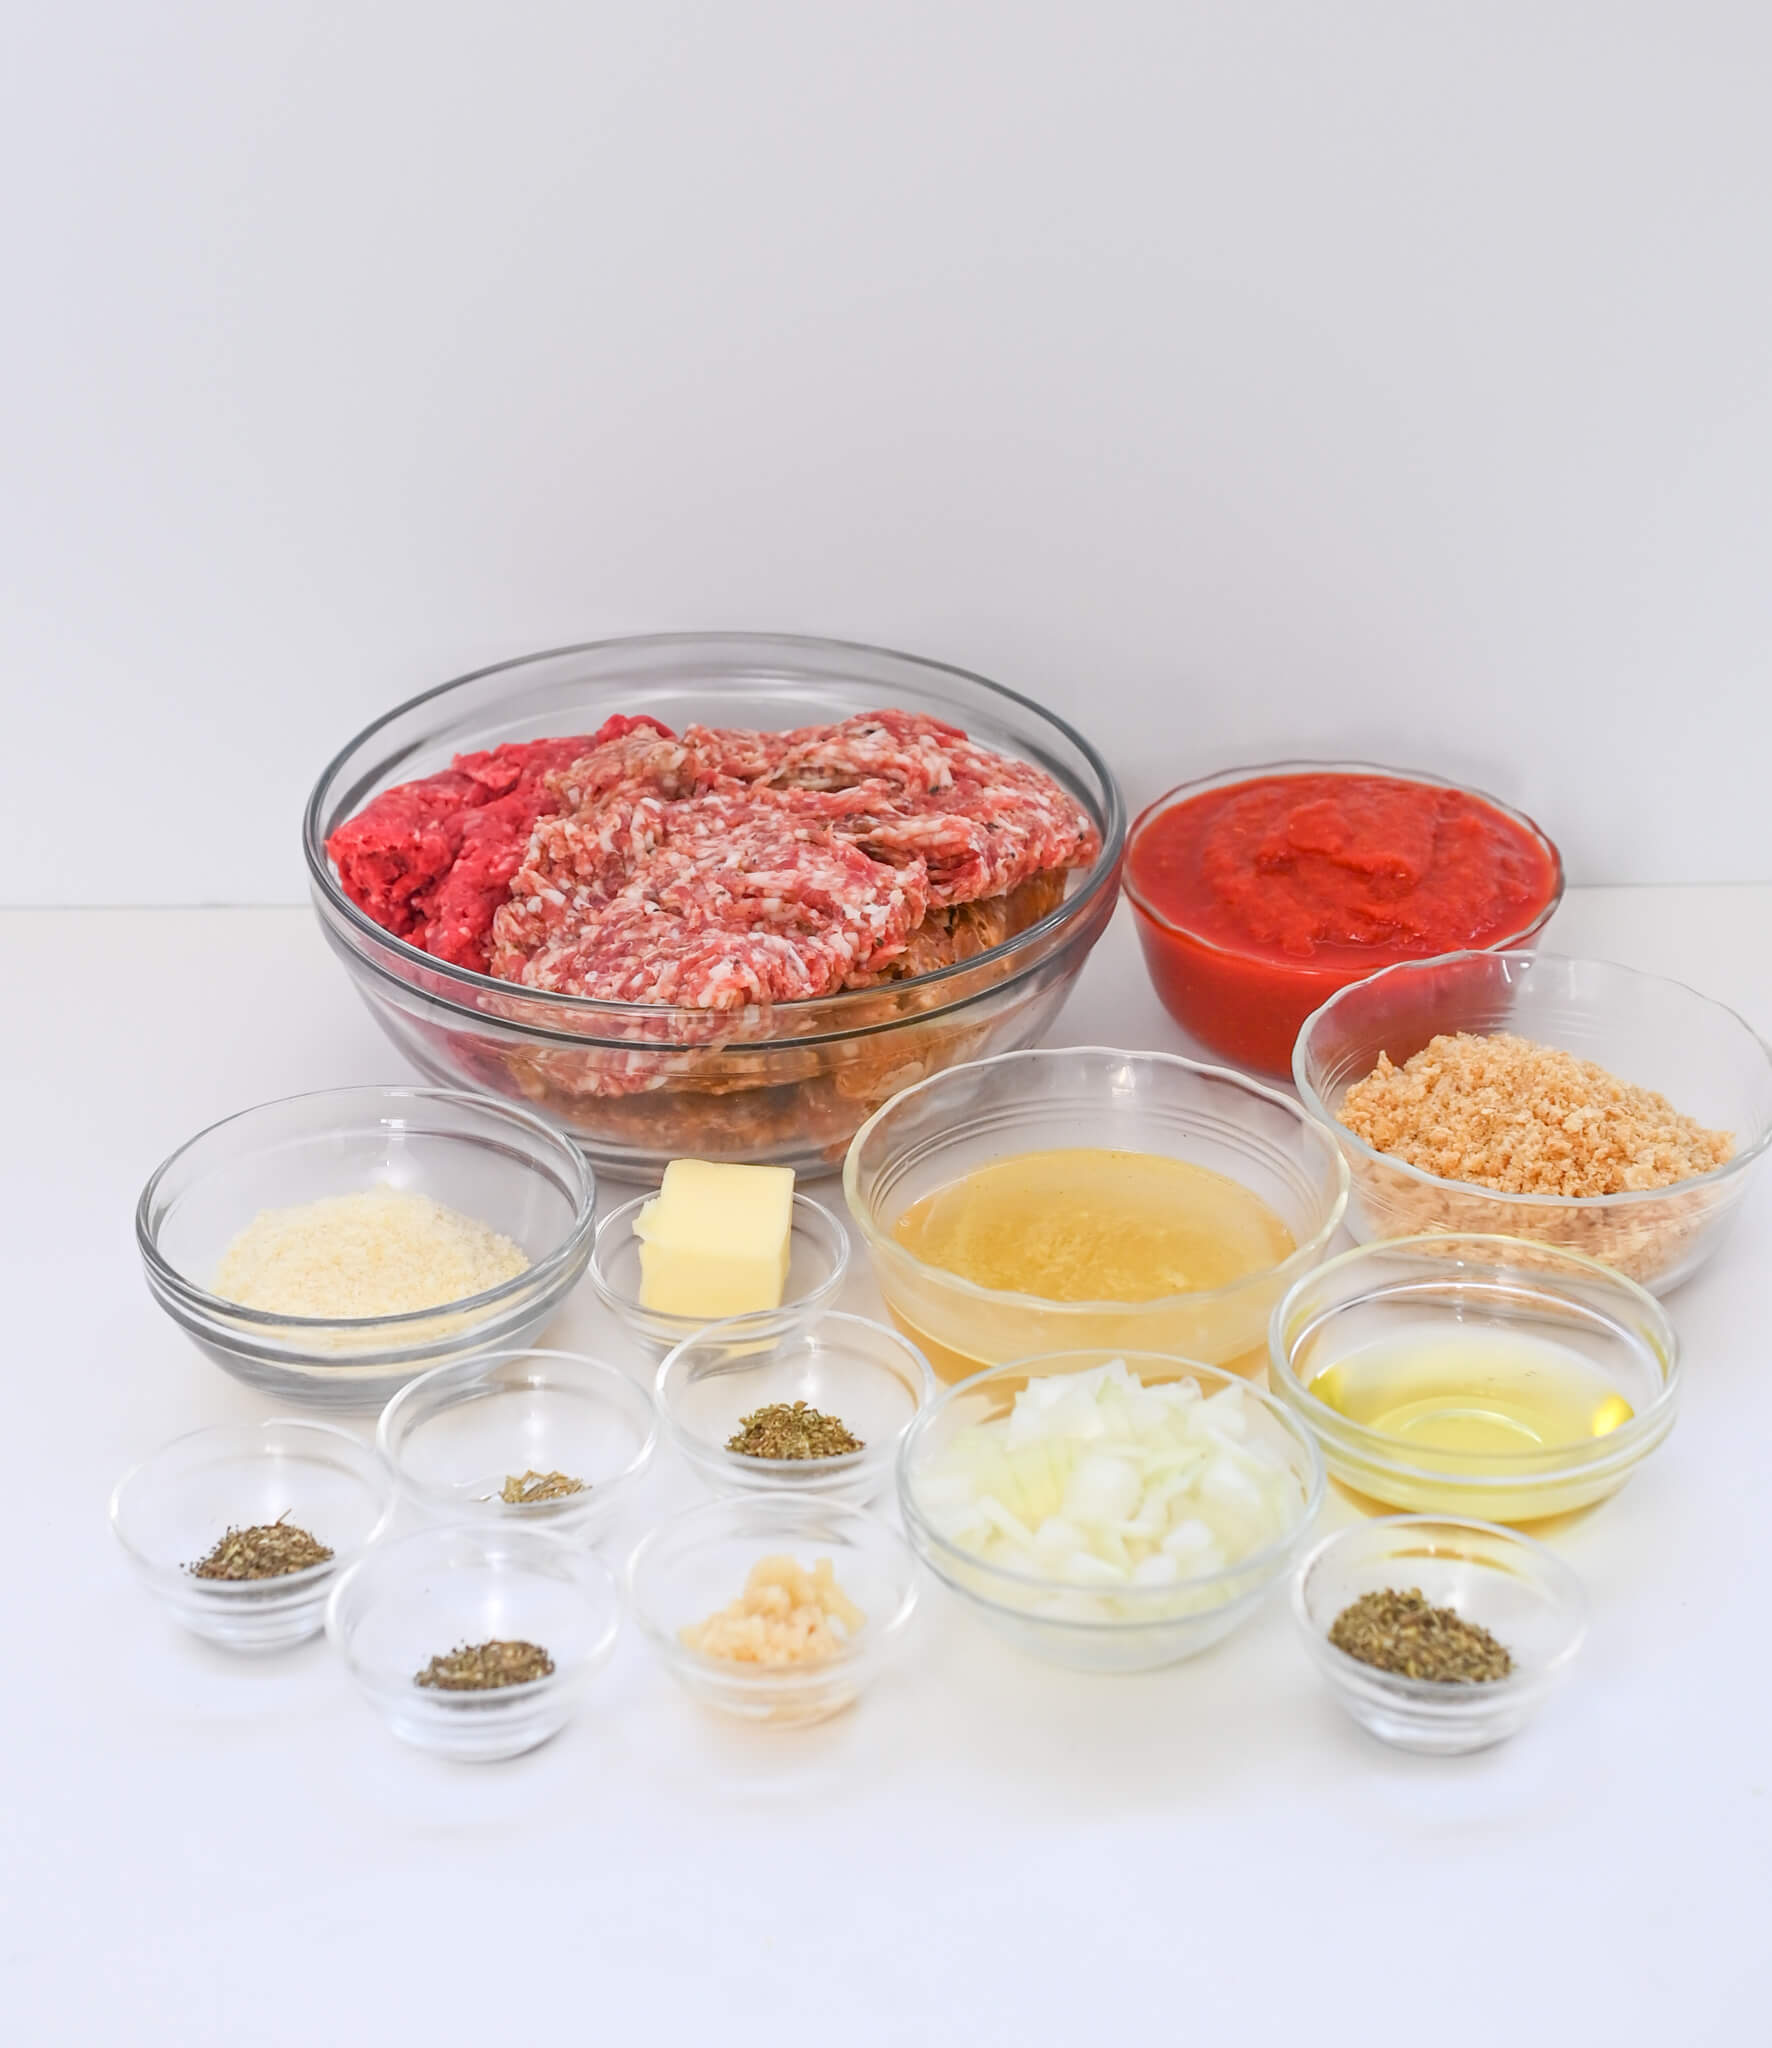 Italian sausage meatballs and other ingredients for a hamburger are shown in bowls on a white background.